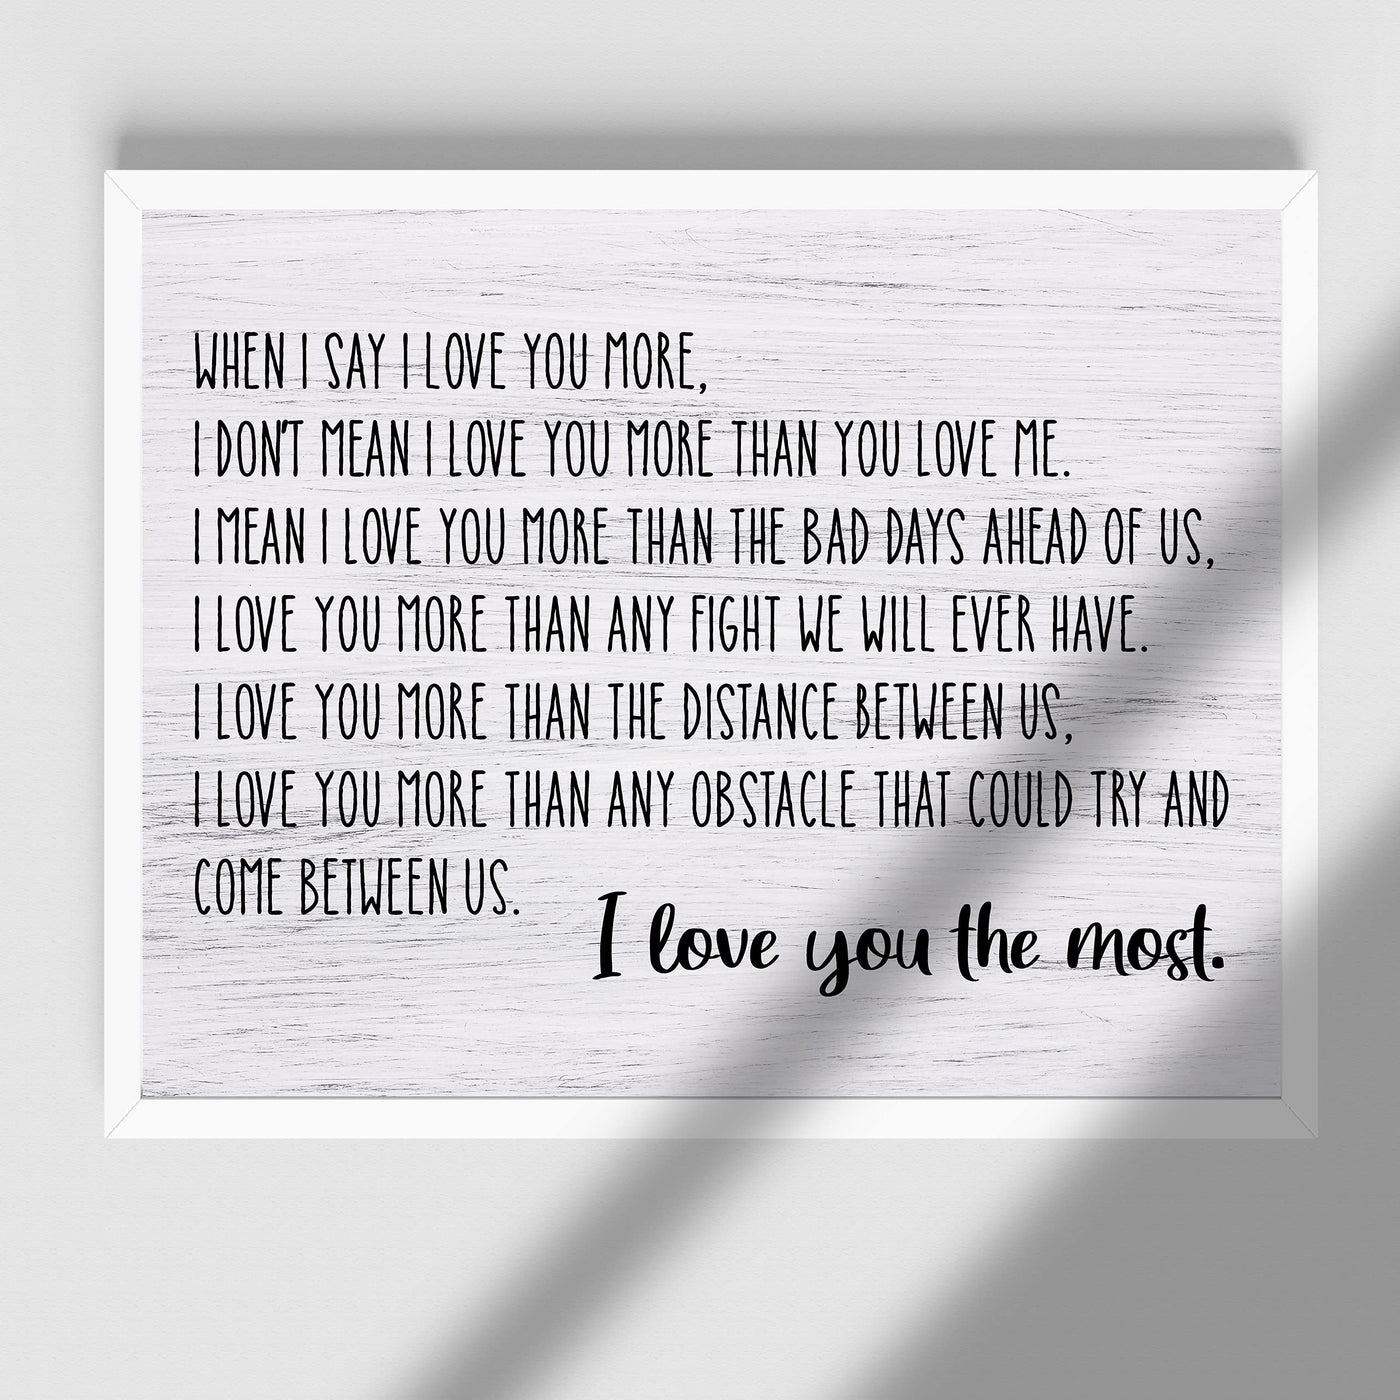 I Love You the Most Love Quotes Wall Decor-14 x 11" Inspirational Love & Marriage Print w/Replica Wood Design-Ready to Frame. Romantic Gift for Couples. Perfect Wedding Sign! Printed on Photo Paper.